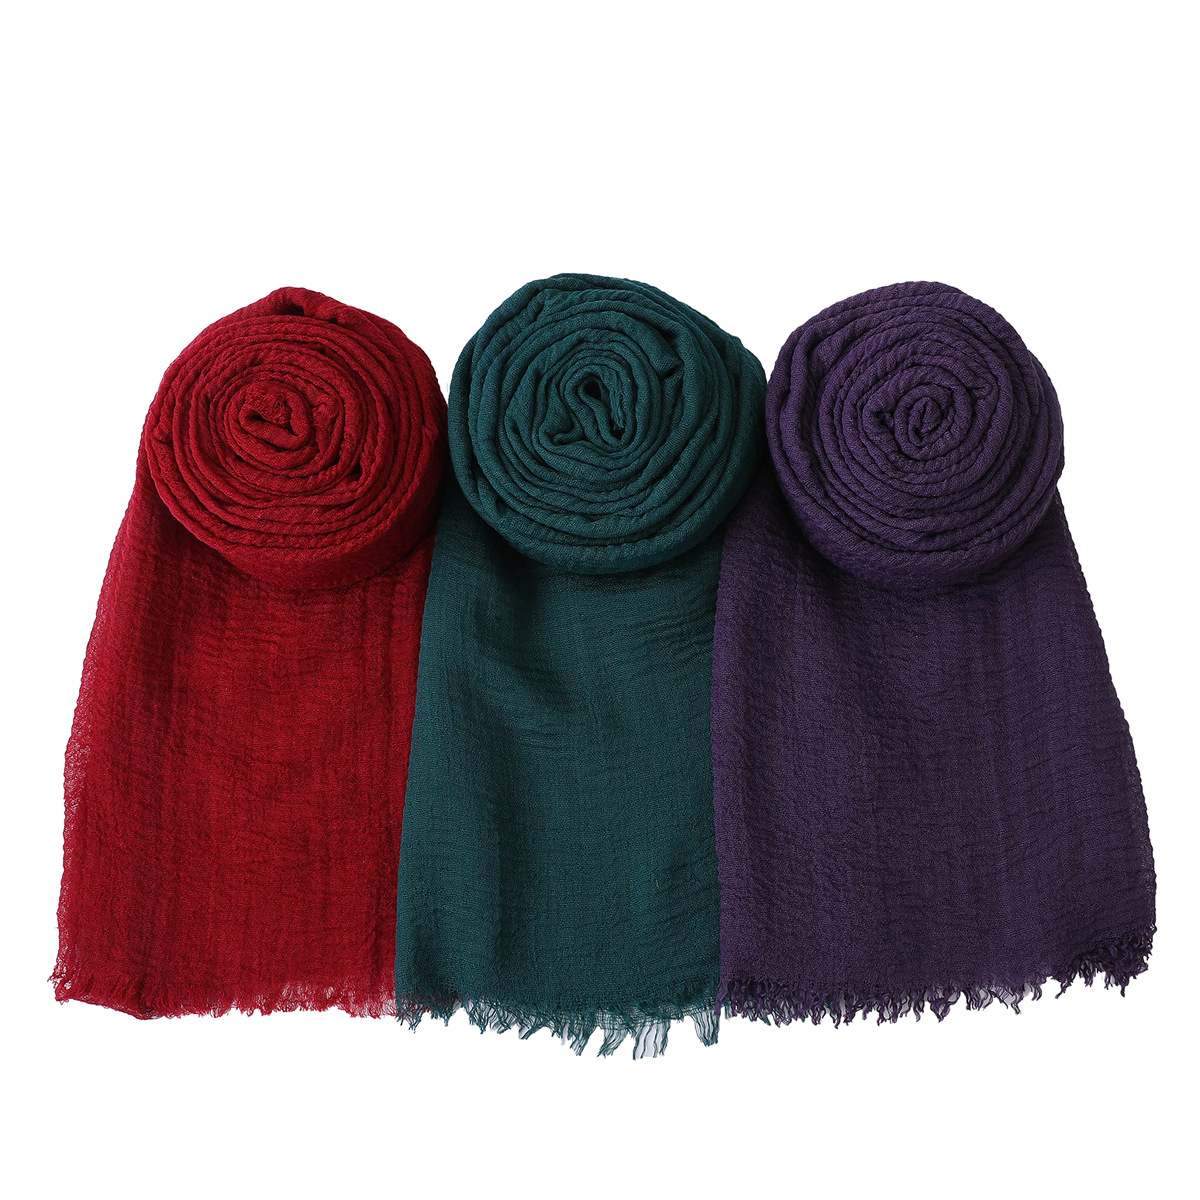 One Piece Dropshipping Cross-Border New Arrival 1 Group 3 Pack Solid Color Casual Cotton Linen Pleated Shawl All-Matching Graceful Women's Scarf